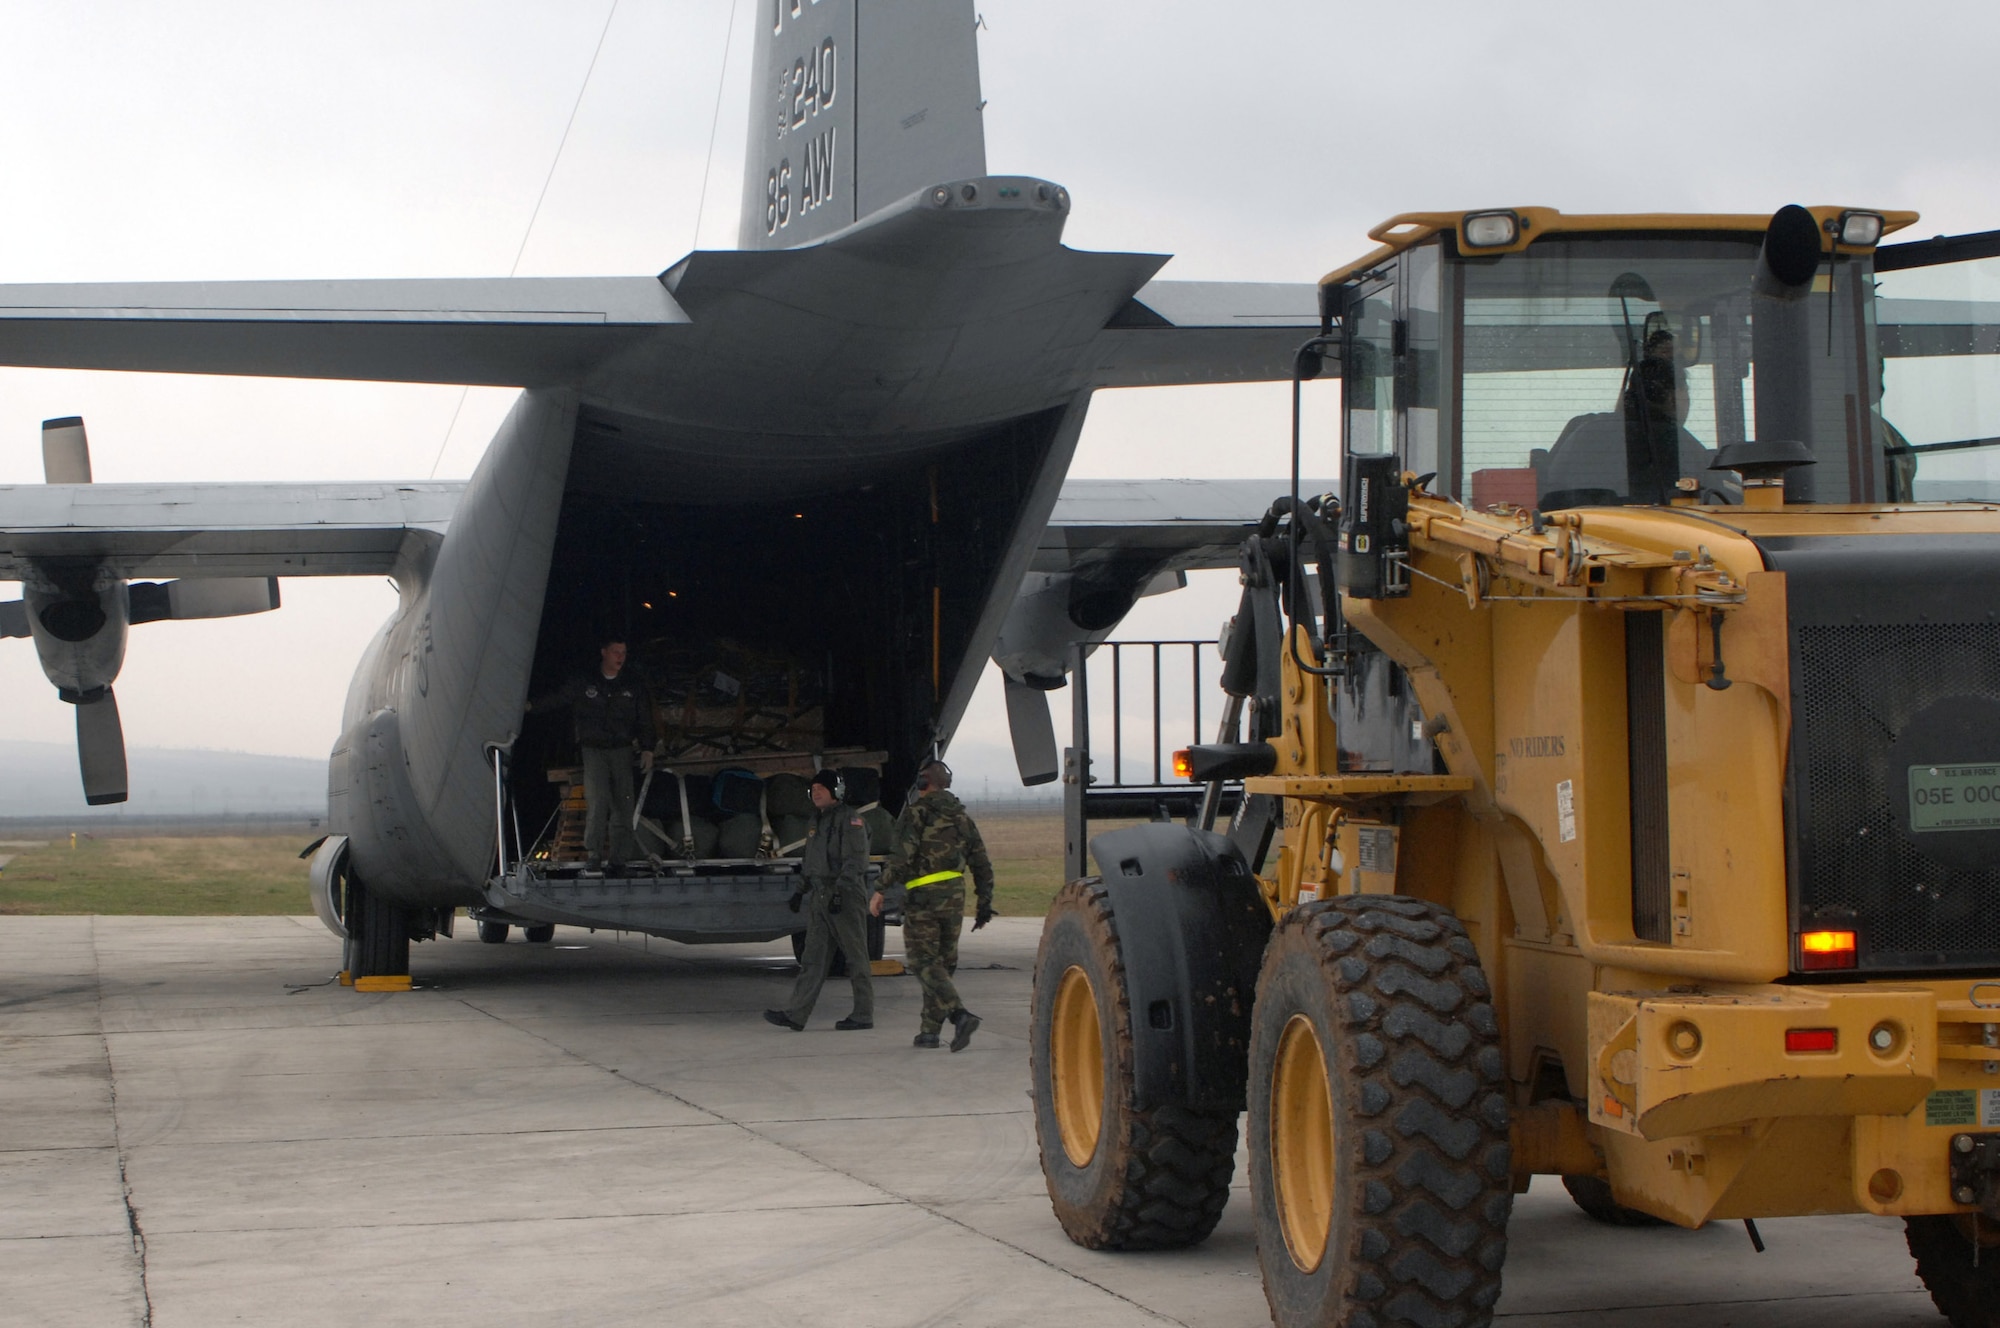 Airmen from the 404th Expeditionary Air Base Squadron unload pallets from a 86th Airlift Wing C-130 Hercules dropping off cargo and personnel here March 25. A four-man team of Airmen received and processed more than 500,000 pounds of cargo here toward building up U.S. operations at the base in support of the NATO summit. The U.S forces are augmenting NATO by providing infrastructure and aircraft for the duration of summit in Bucharest, Romania, April 2-4. (U.S. Air Force photo/Senior Airman Teresa M. Hawkins)